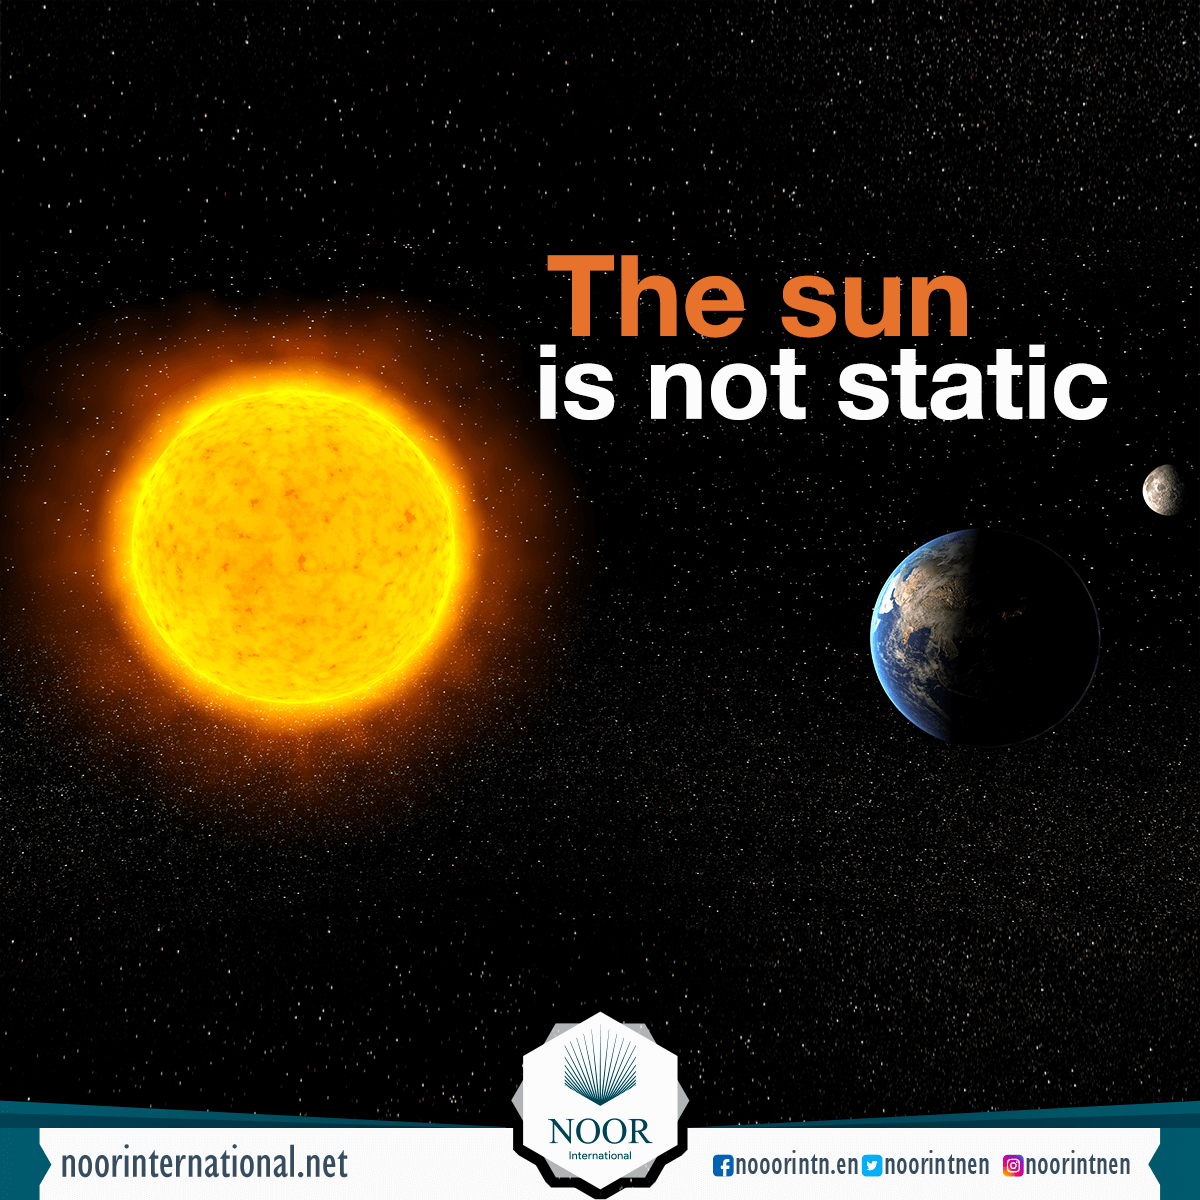 The sun is not static